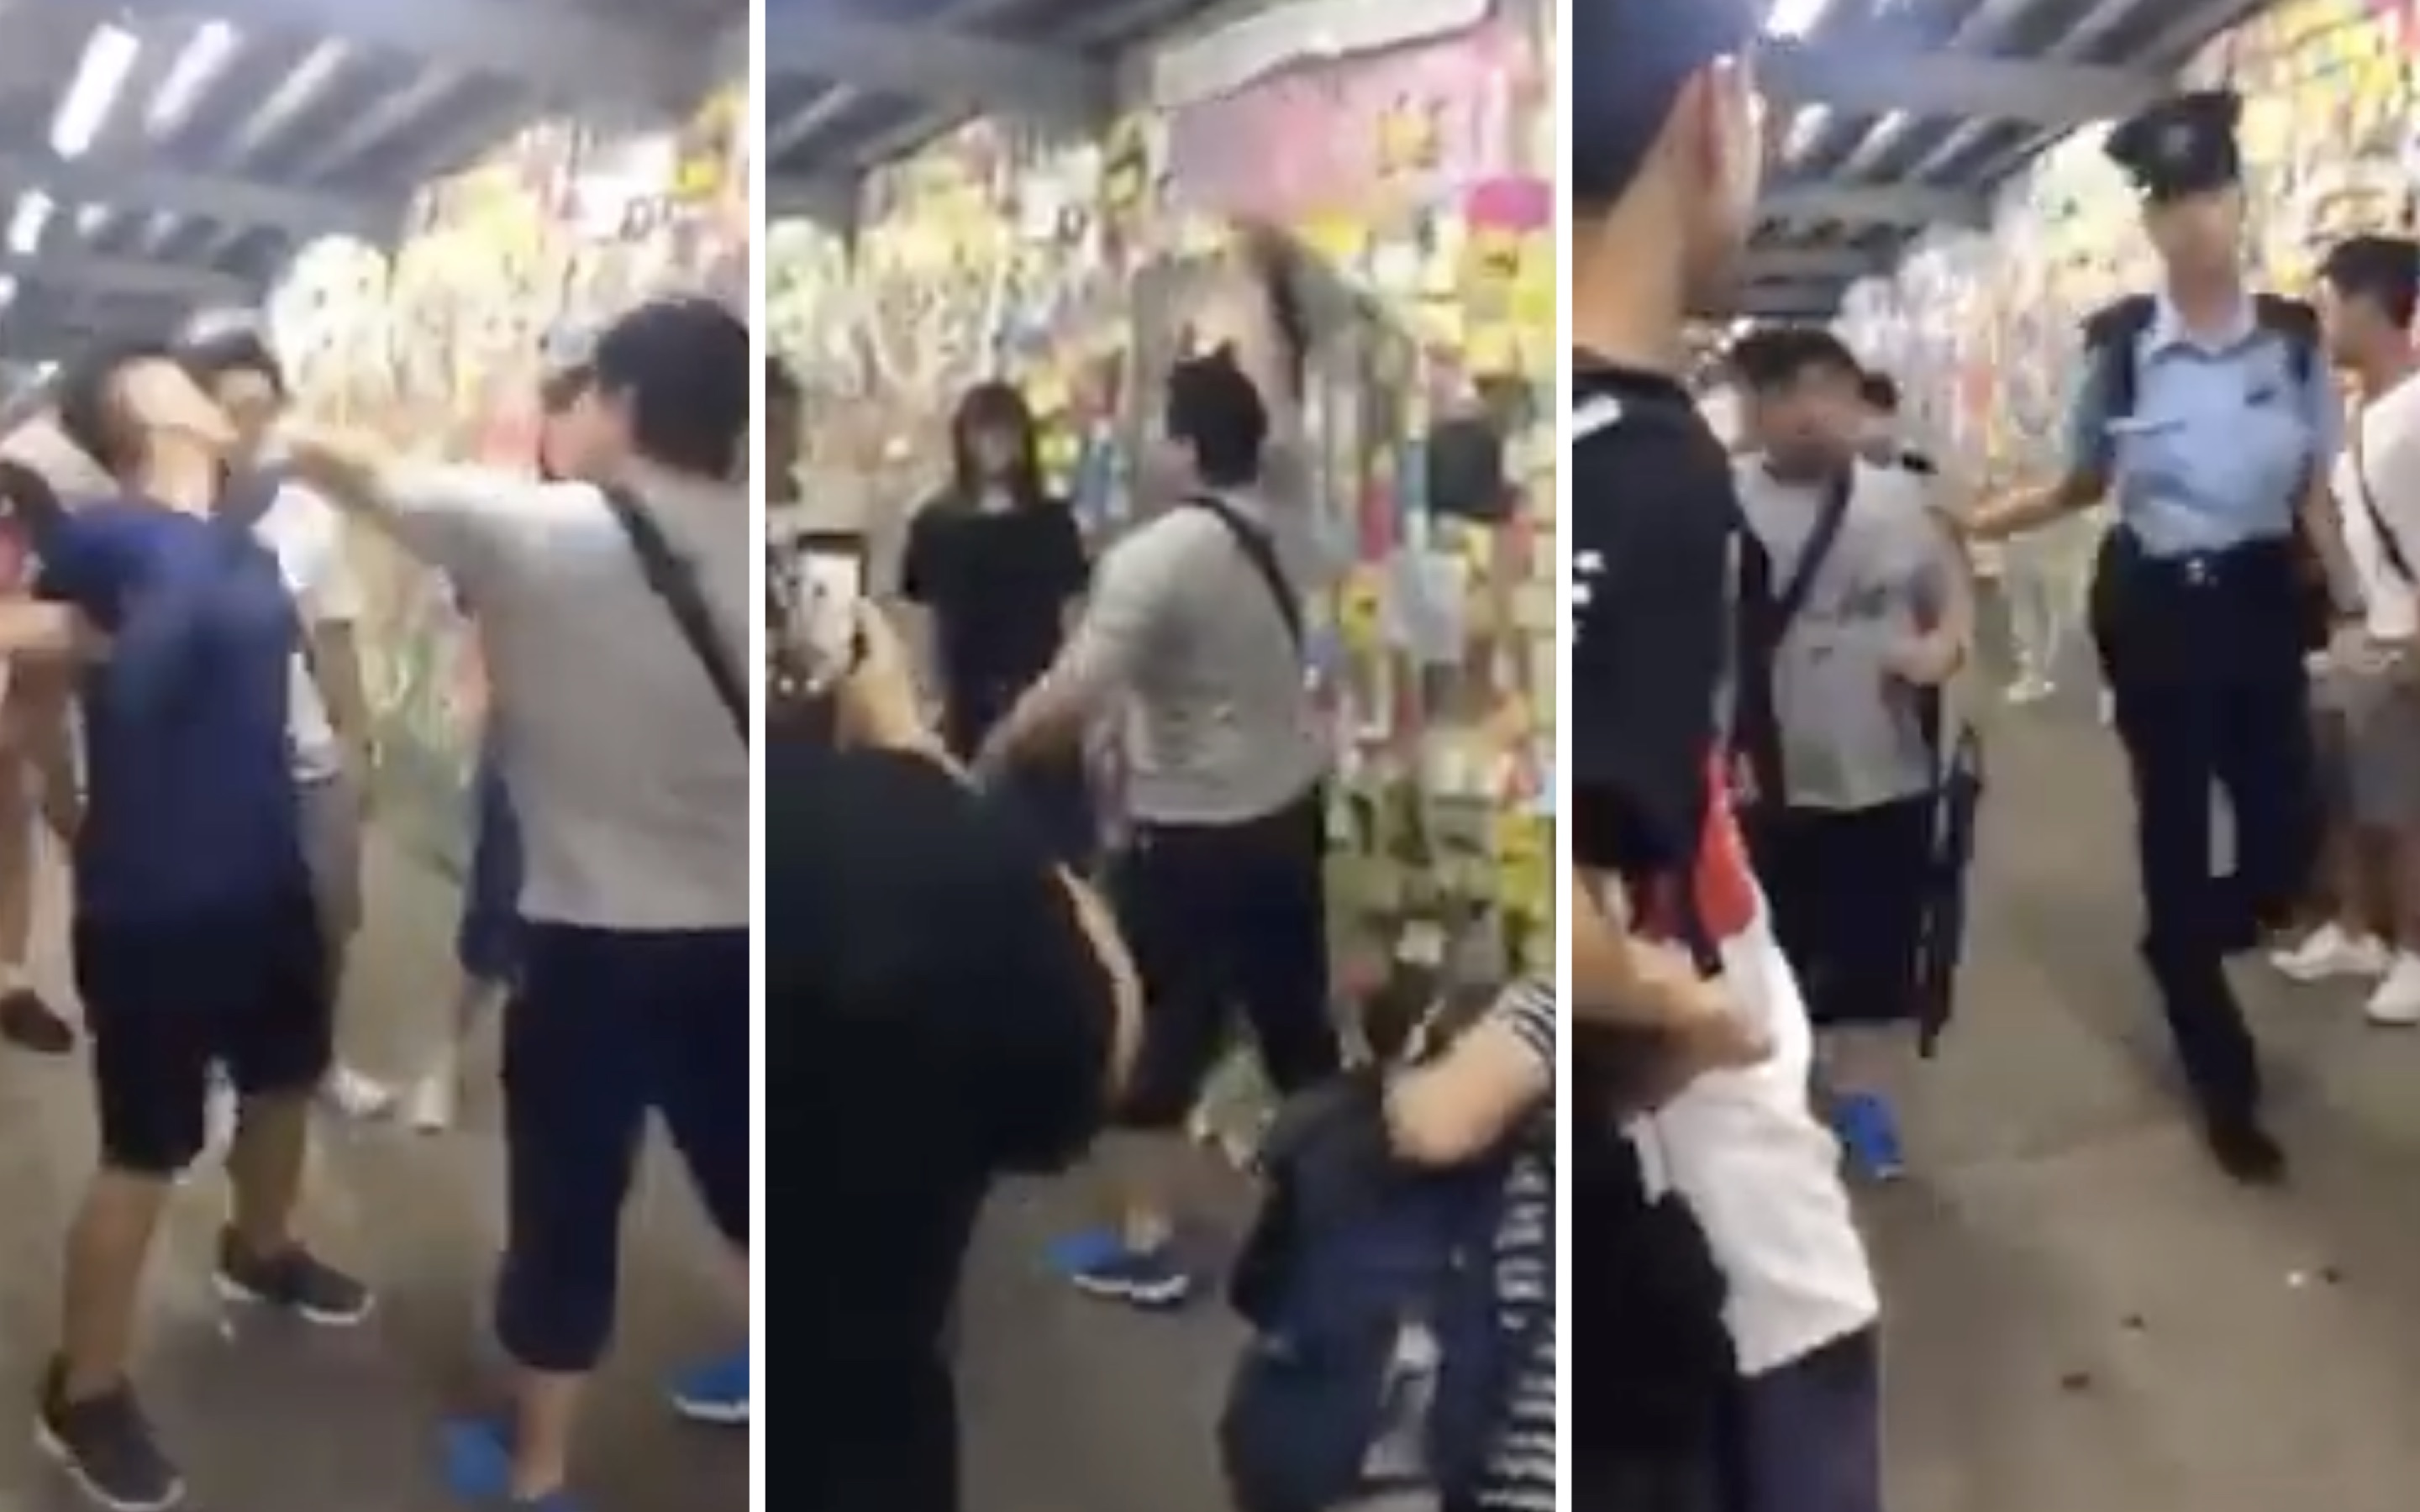 A 46-year-old man surnamed Wong was arrested for punching another man that had been guarding a Lennon Wall in Kowloon Bay. Screengrab via YouTube.